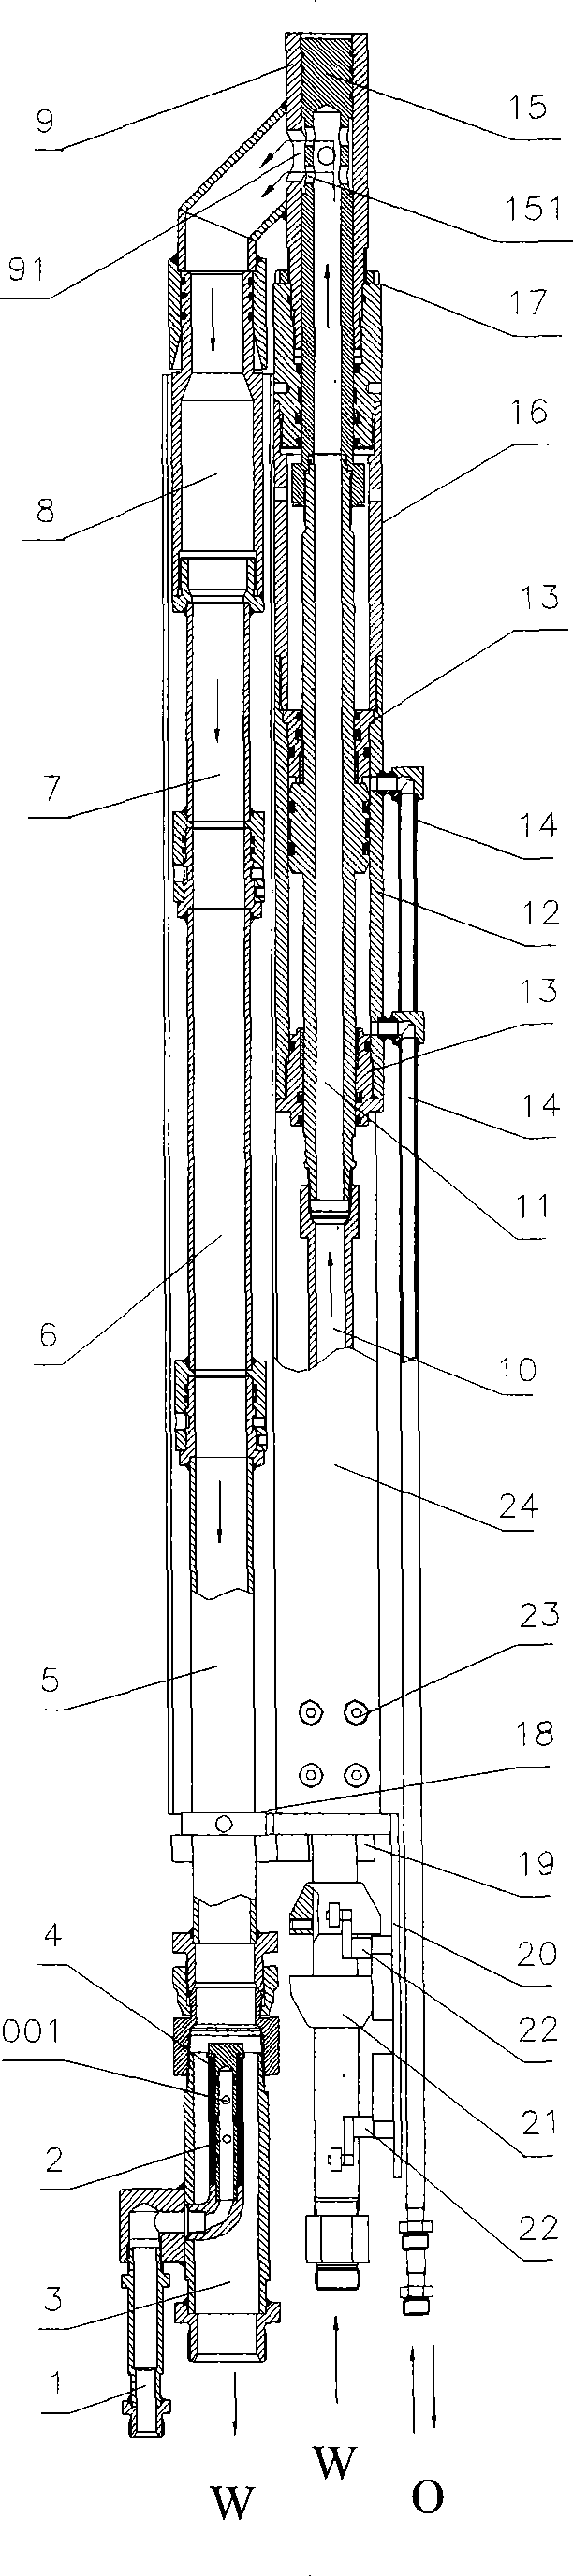 Dual-fluid synchronous slip casting and cleaning switching mechanism